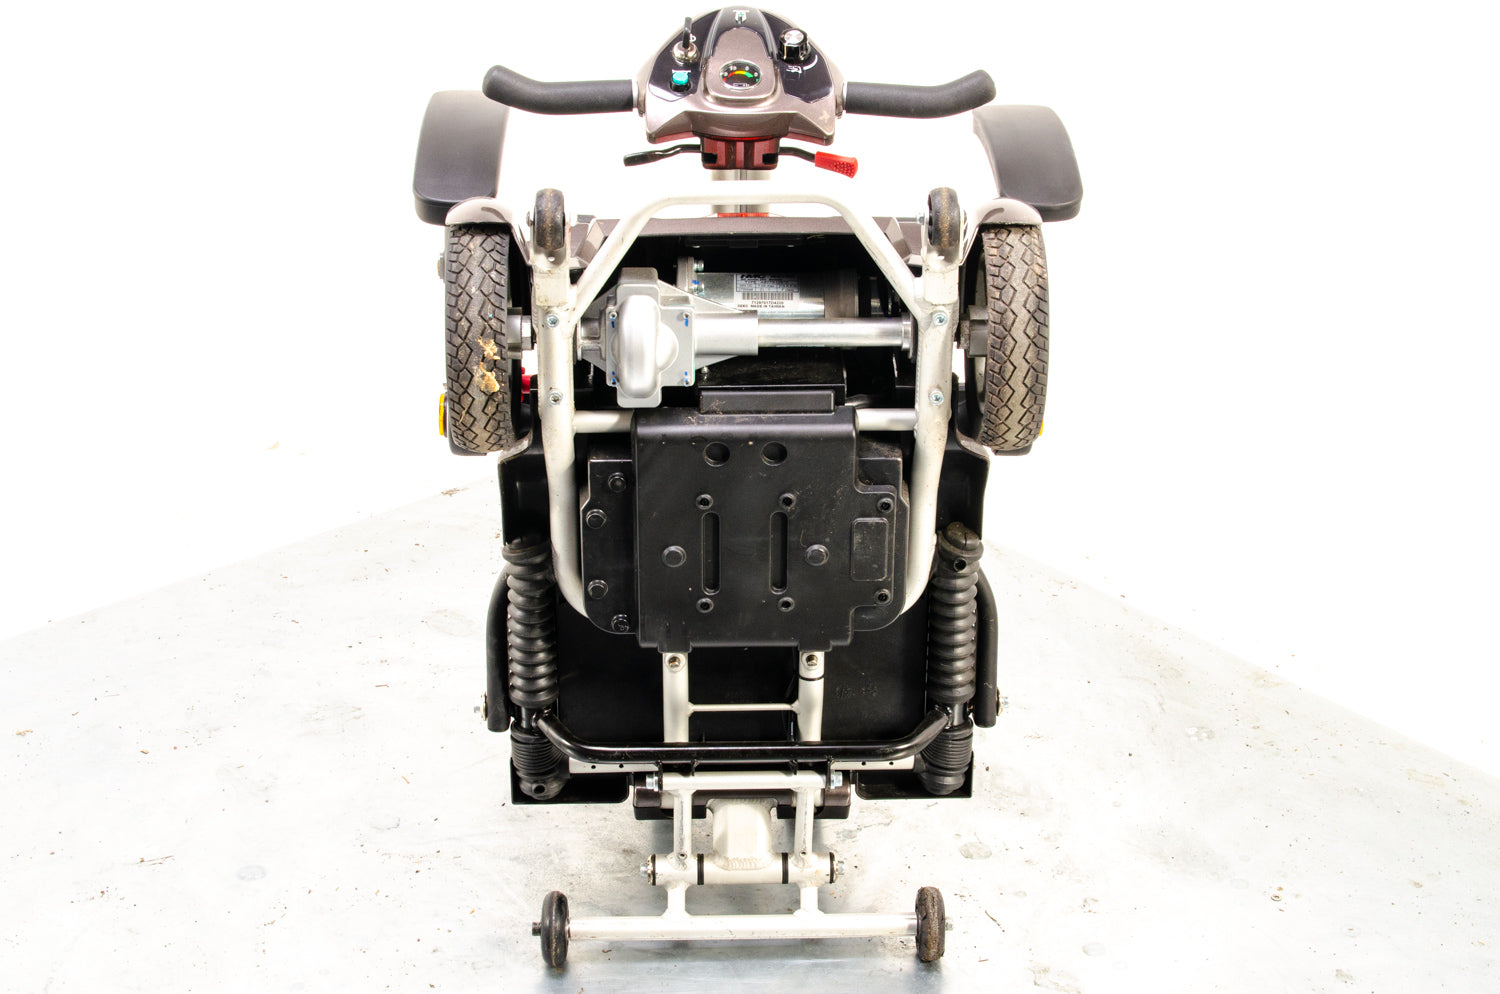 TGA Minimo Used Mobility Scooter Small Compact Folding Travel Lithium Battery Lightweight 13332